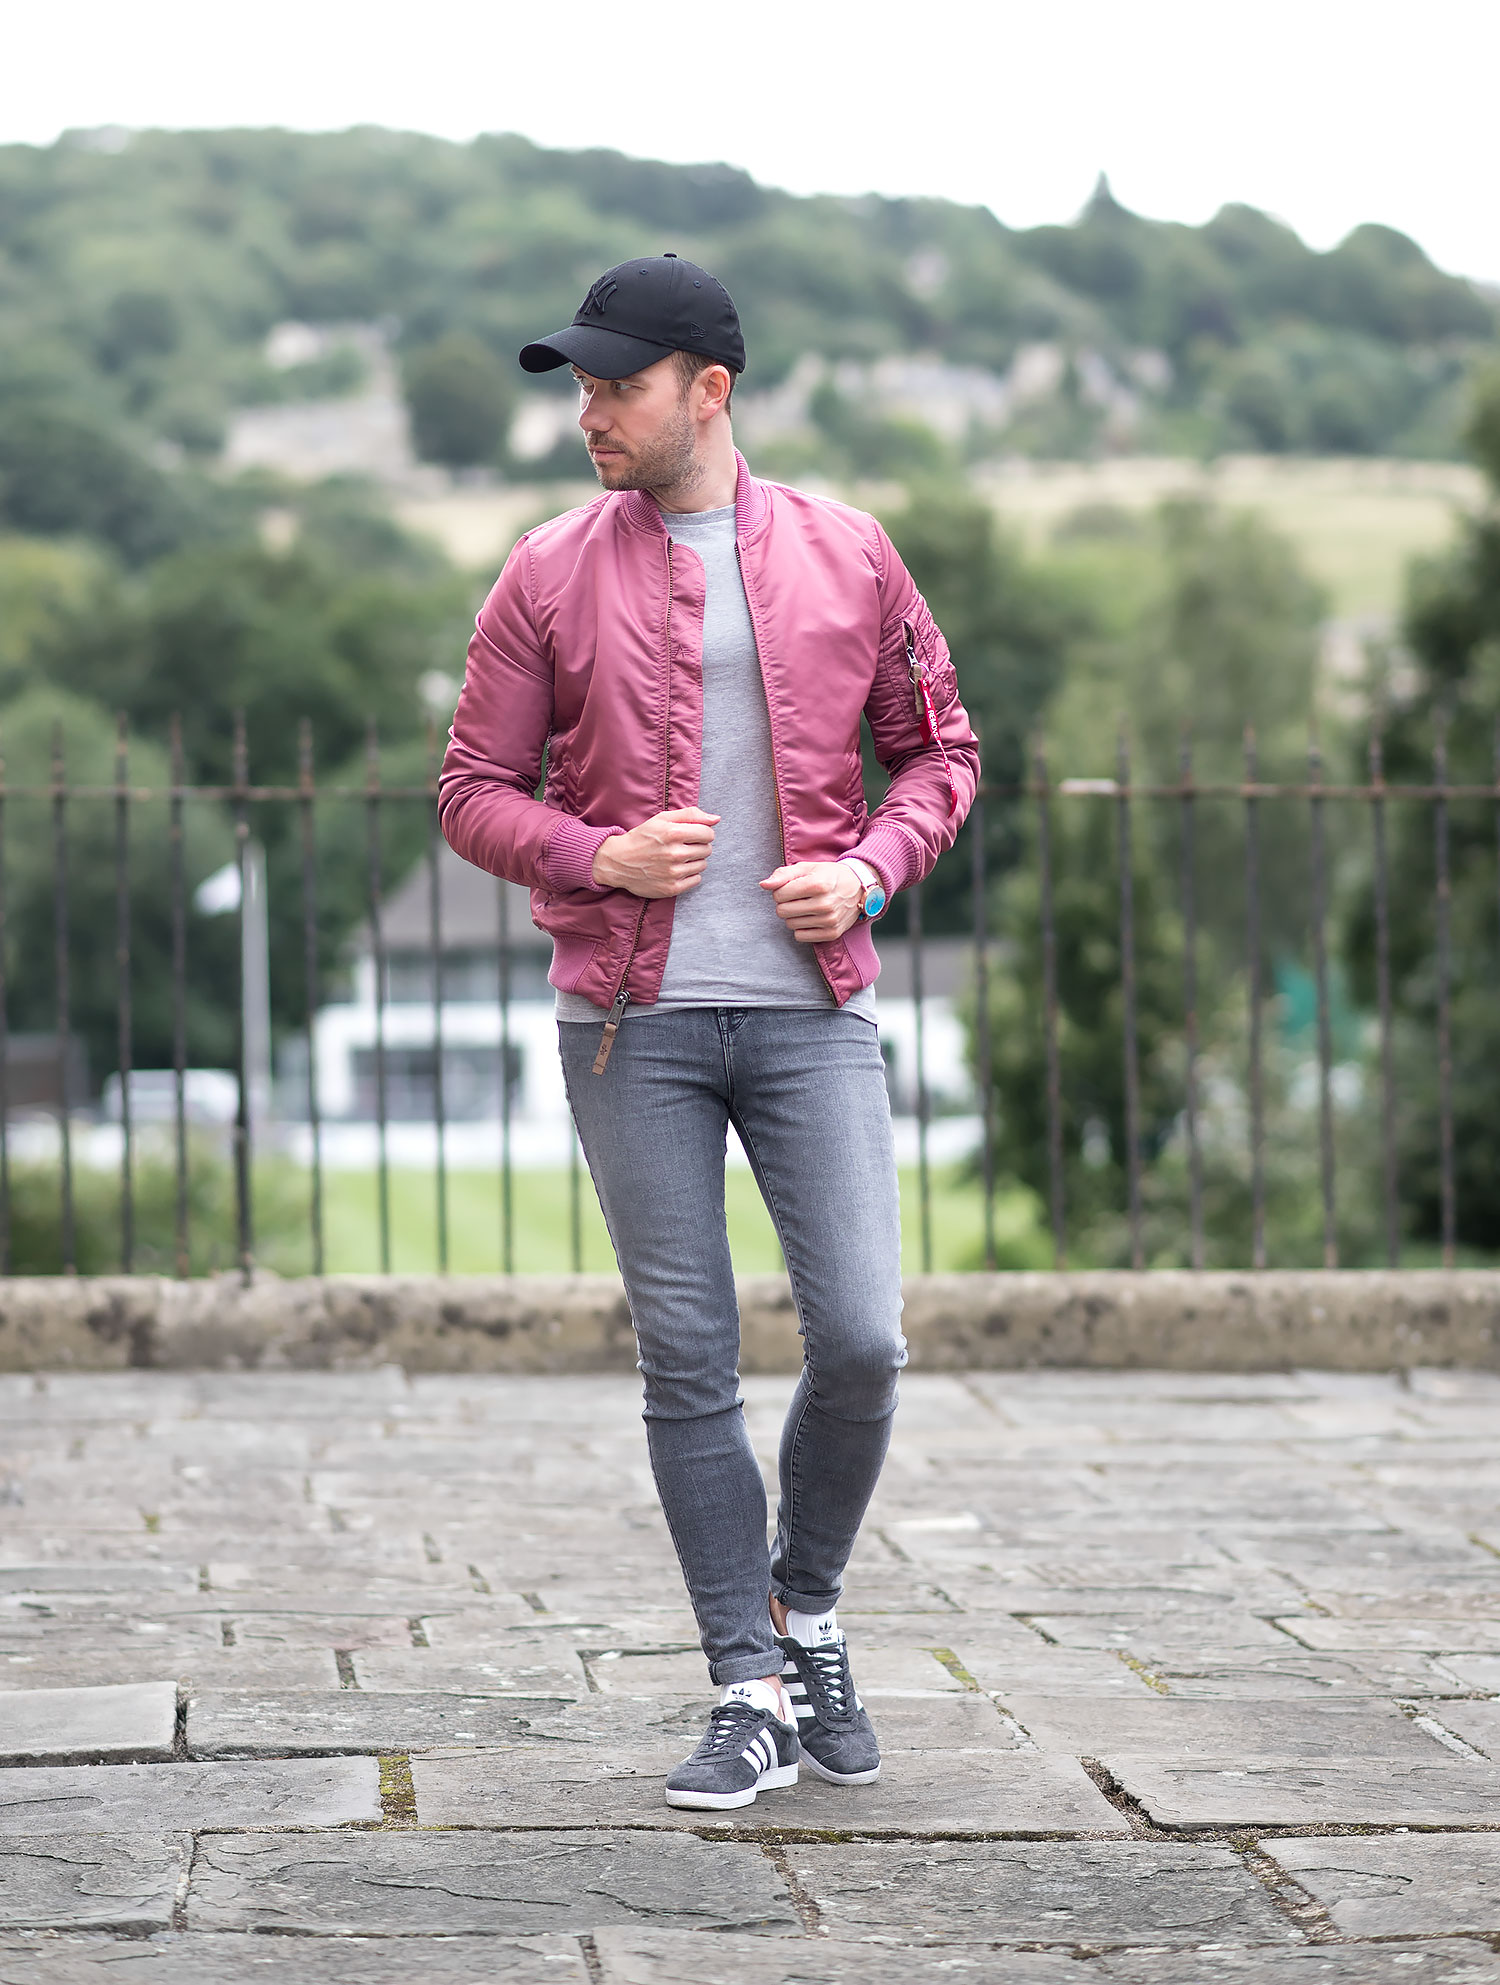 A Touch Of Pink With My Alpha Industries Bomber Jacket - Your Average Guy